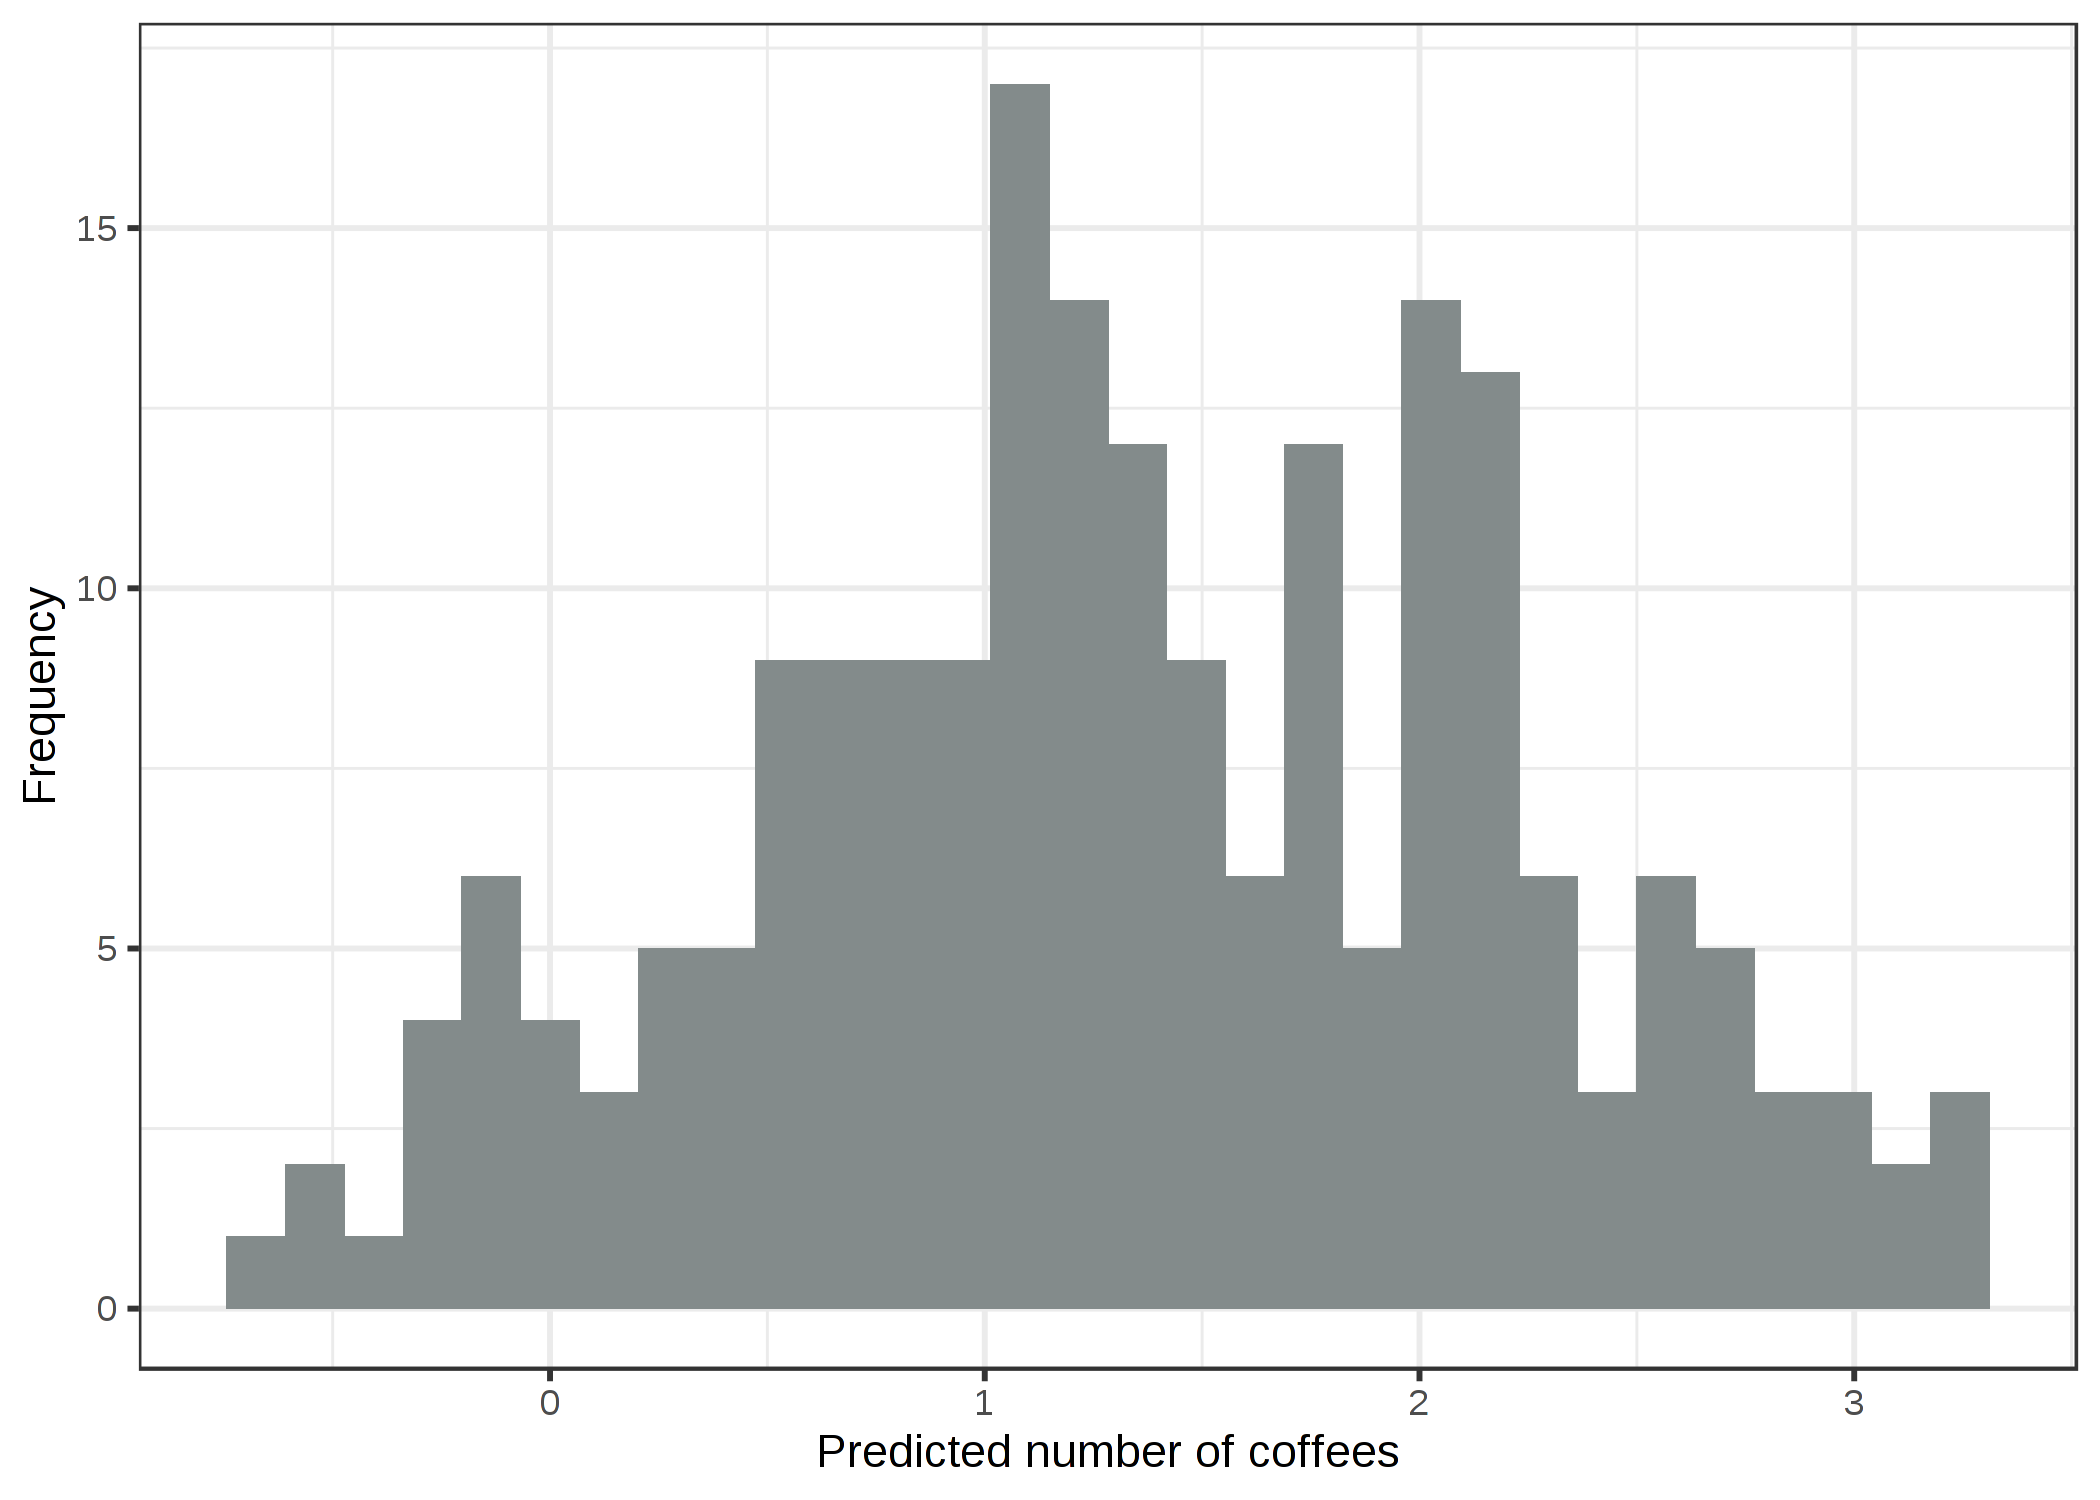 Predicted number of coffees dependent on stress, sleep and work. The linear model predicts negative values.